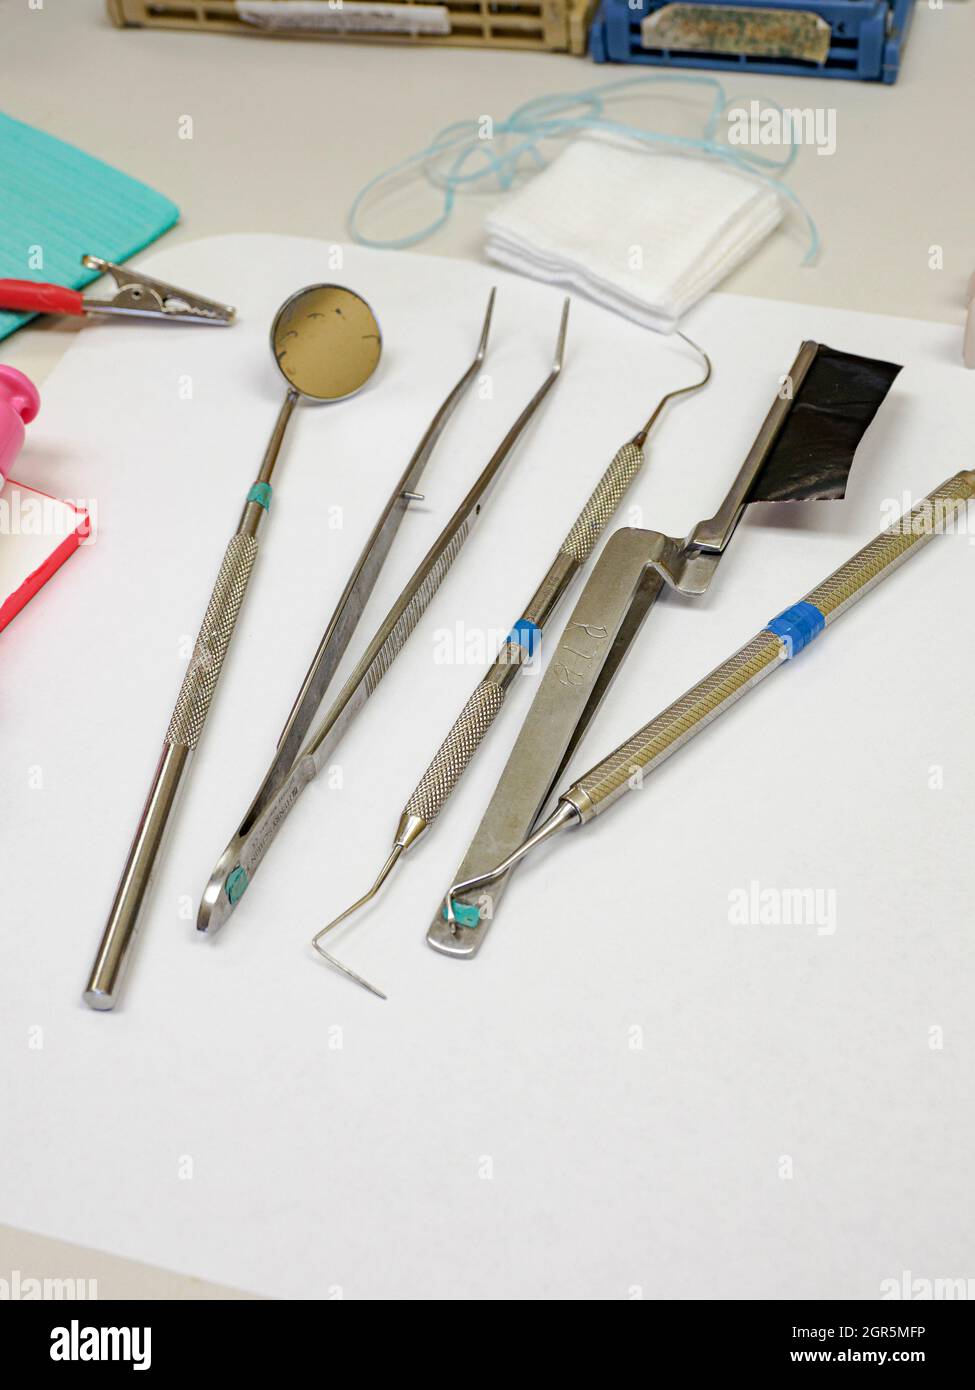 Dental tools on a tray in an exam room of a dentist office. Stock Photo